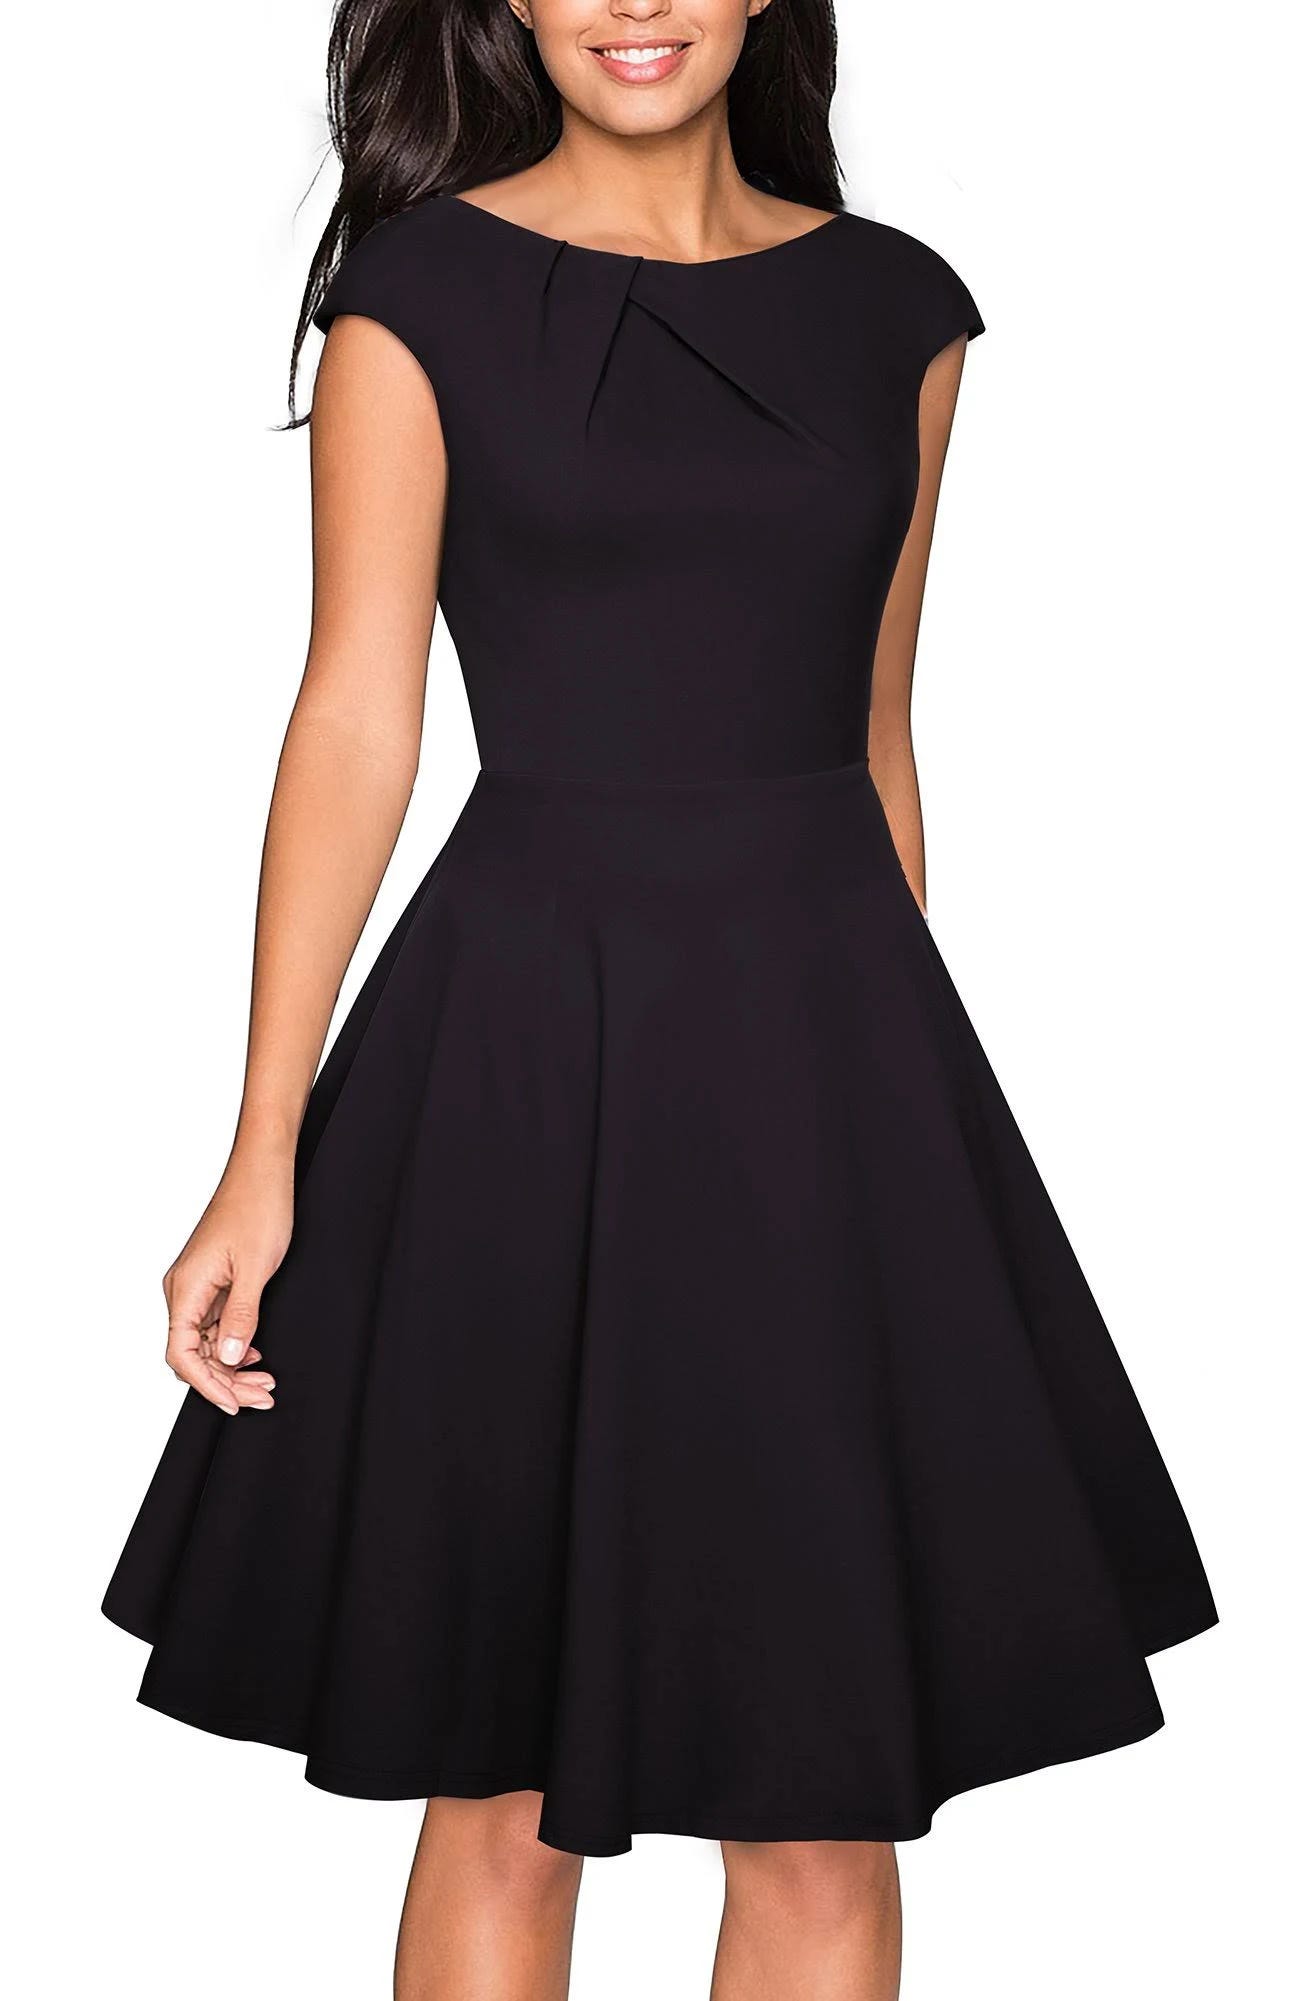 Comfortable Vintage Scoop Neck Party Dress for Any Occasion | Image